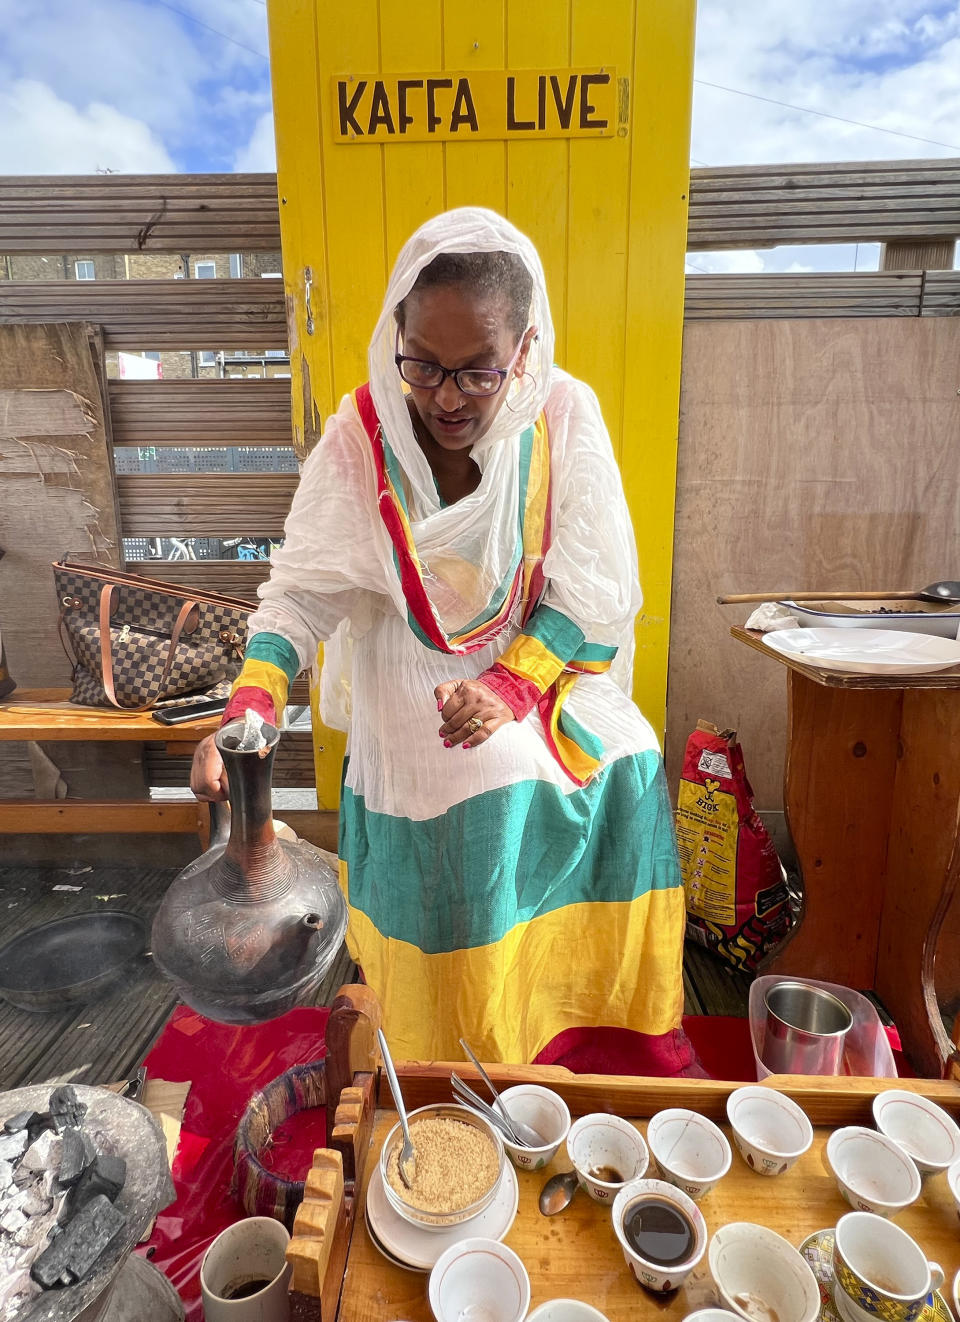 Emebyt Demke, 51, sets down a jebena, or Ethiopian clay coffee pot, after pouring coffee into a small, traditional coffee cup, also known as a sini, at Kaffa Coffee in East London on Friday, Sept. 1, 2023. The London-based International Coffee Organization has declared this Sunday, Oct. 1, as International Coffee Day. (AP Photo/Almaz Abedje)